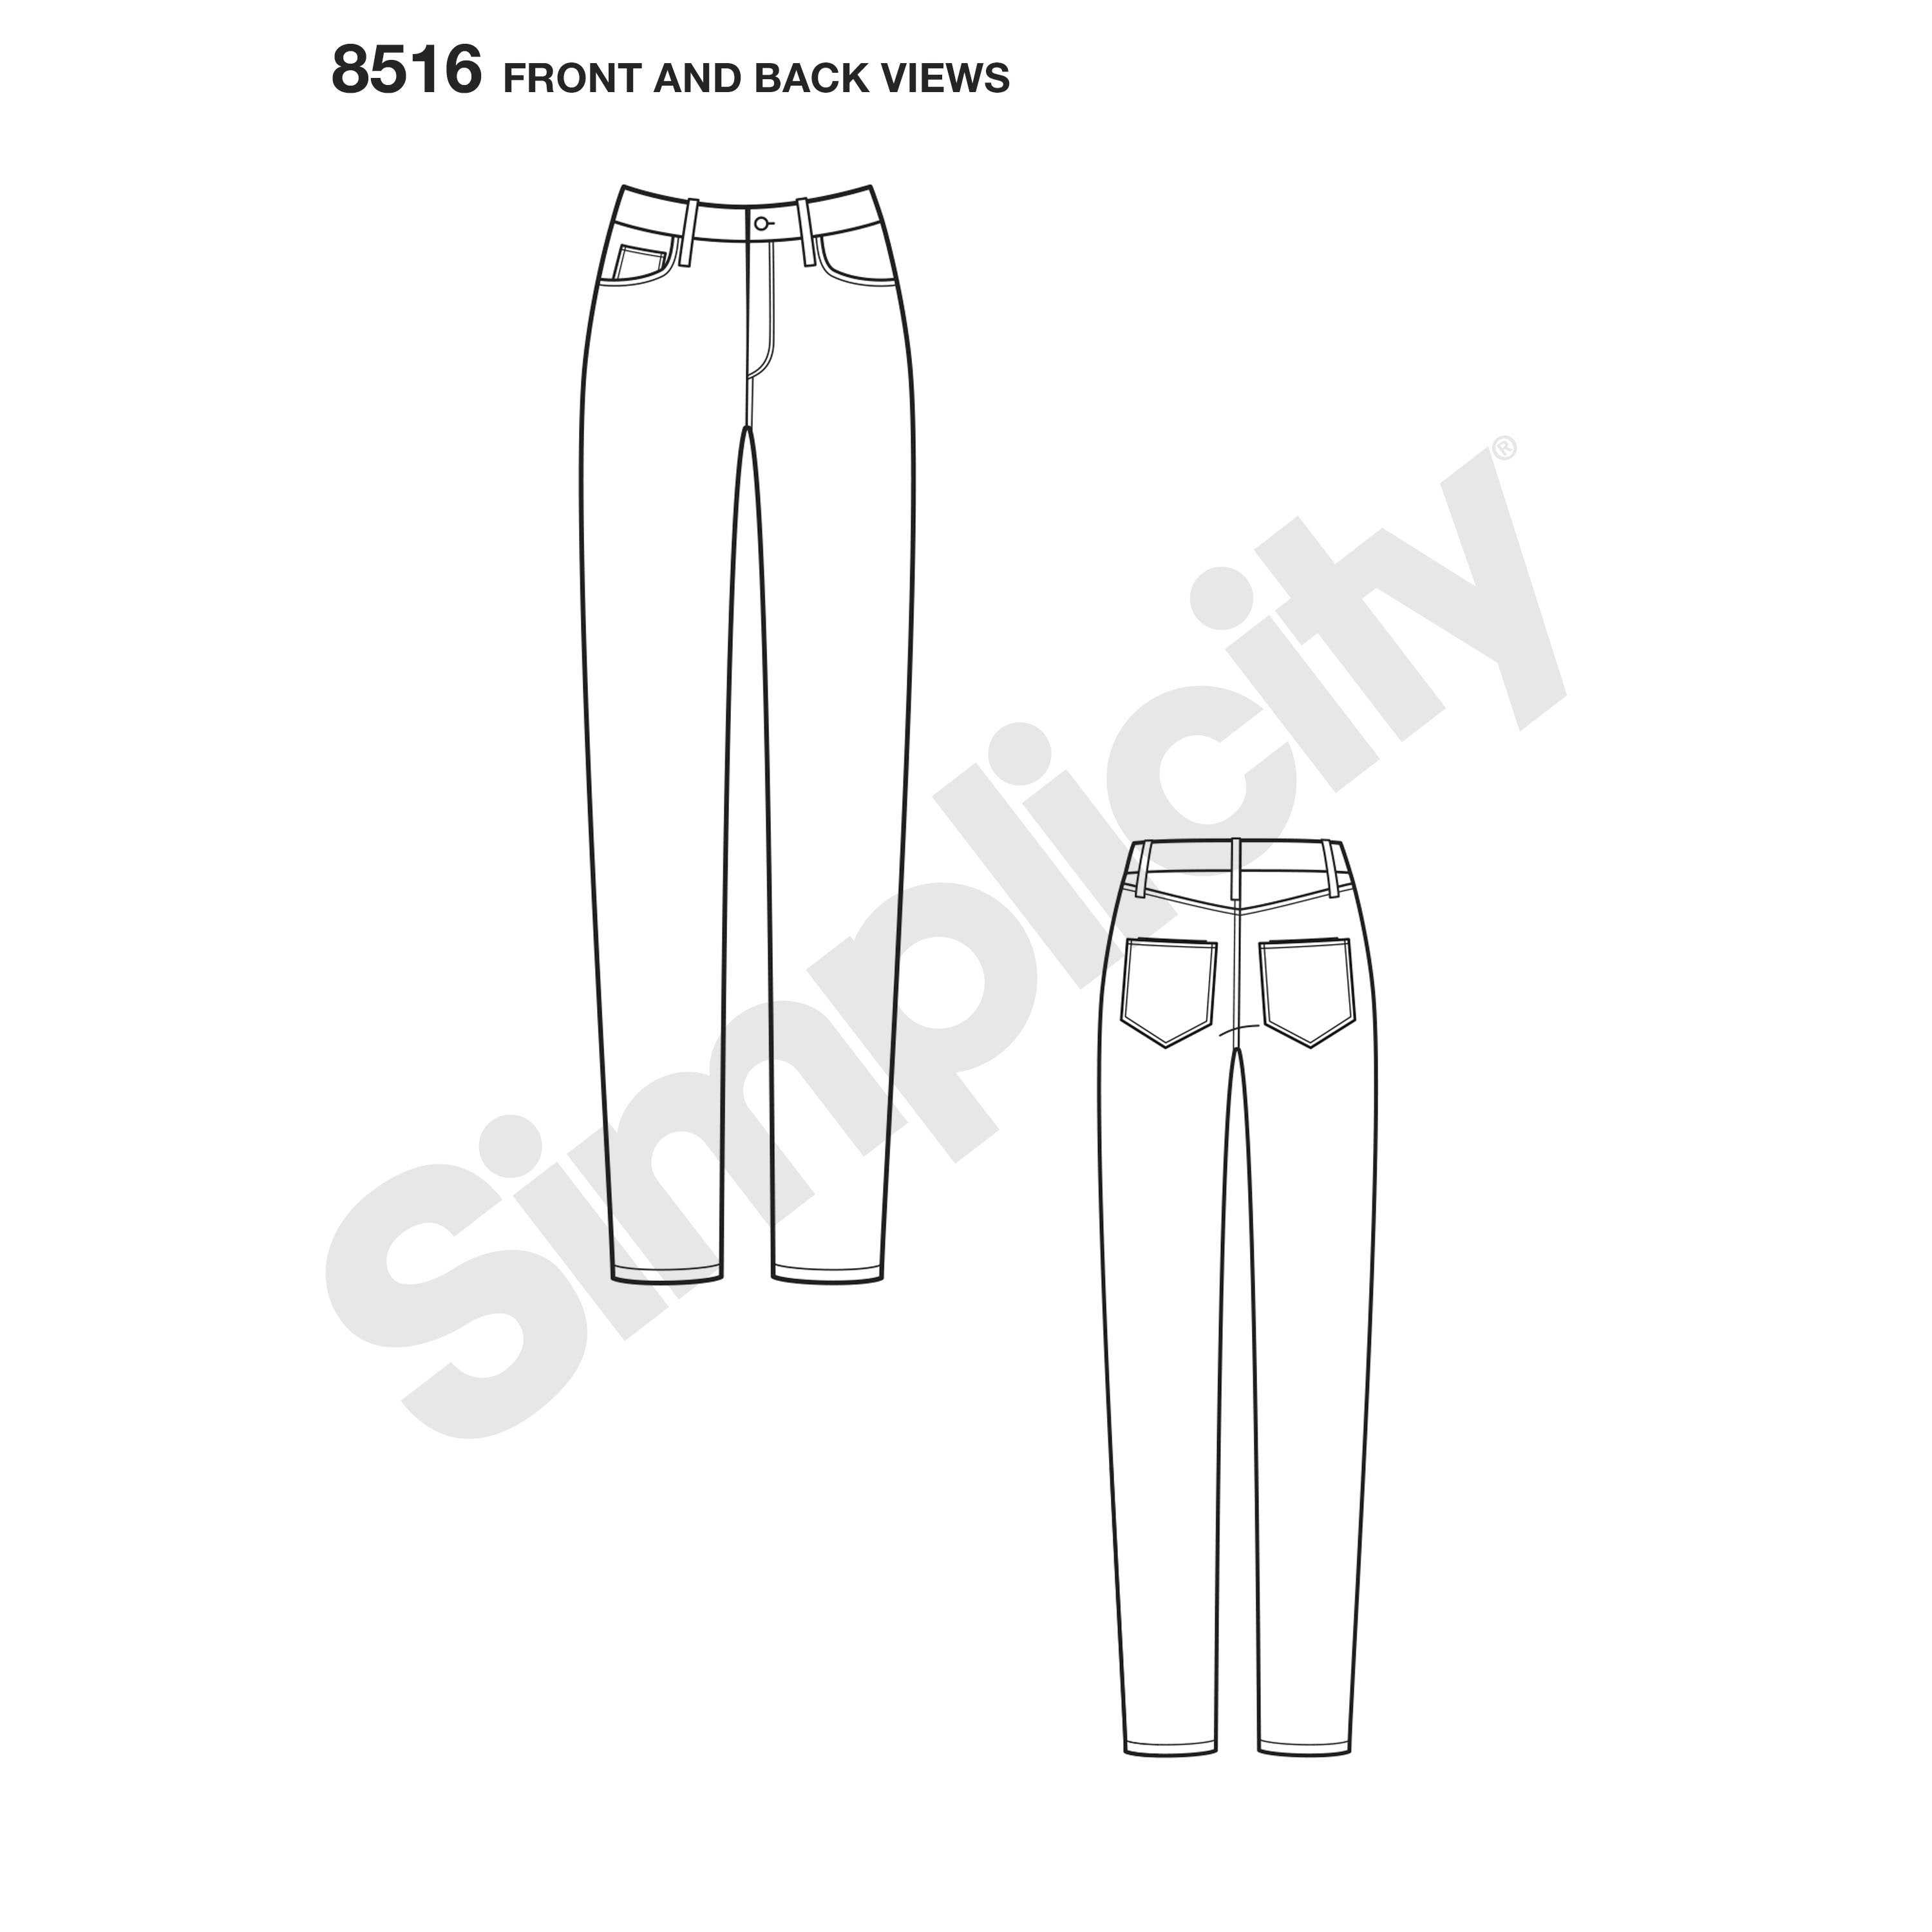 Simplicity Pattern 8516 misses mimi g skinny jeans from Jaycotts Sewing Supplies